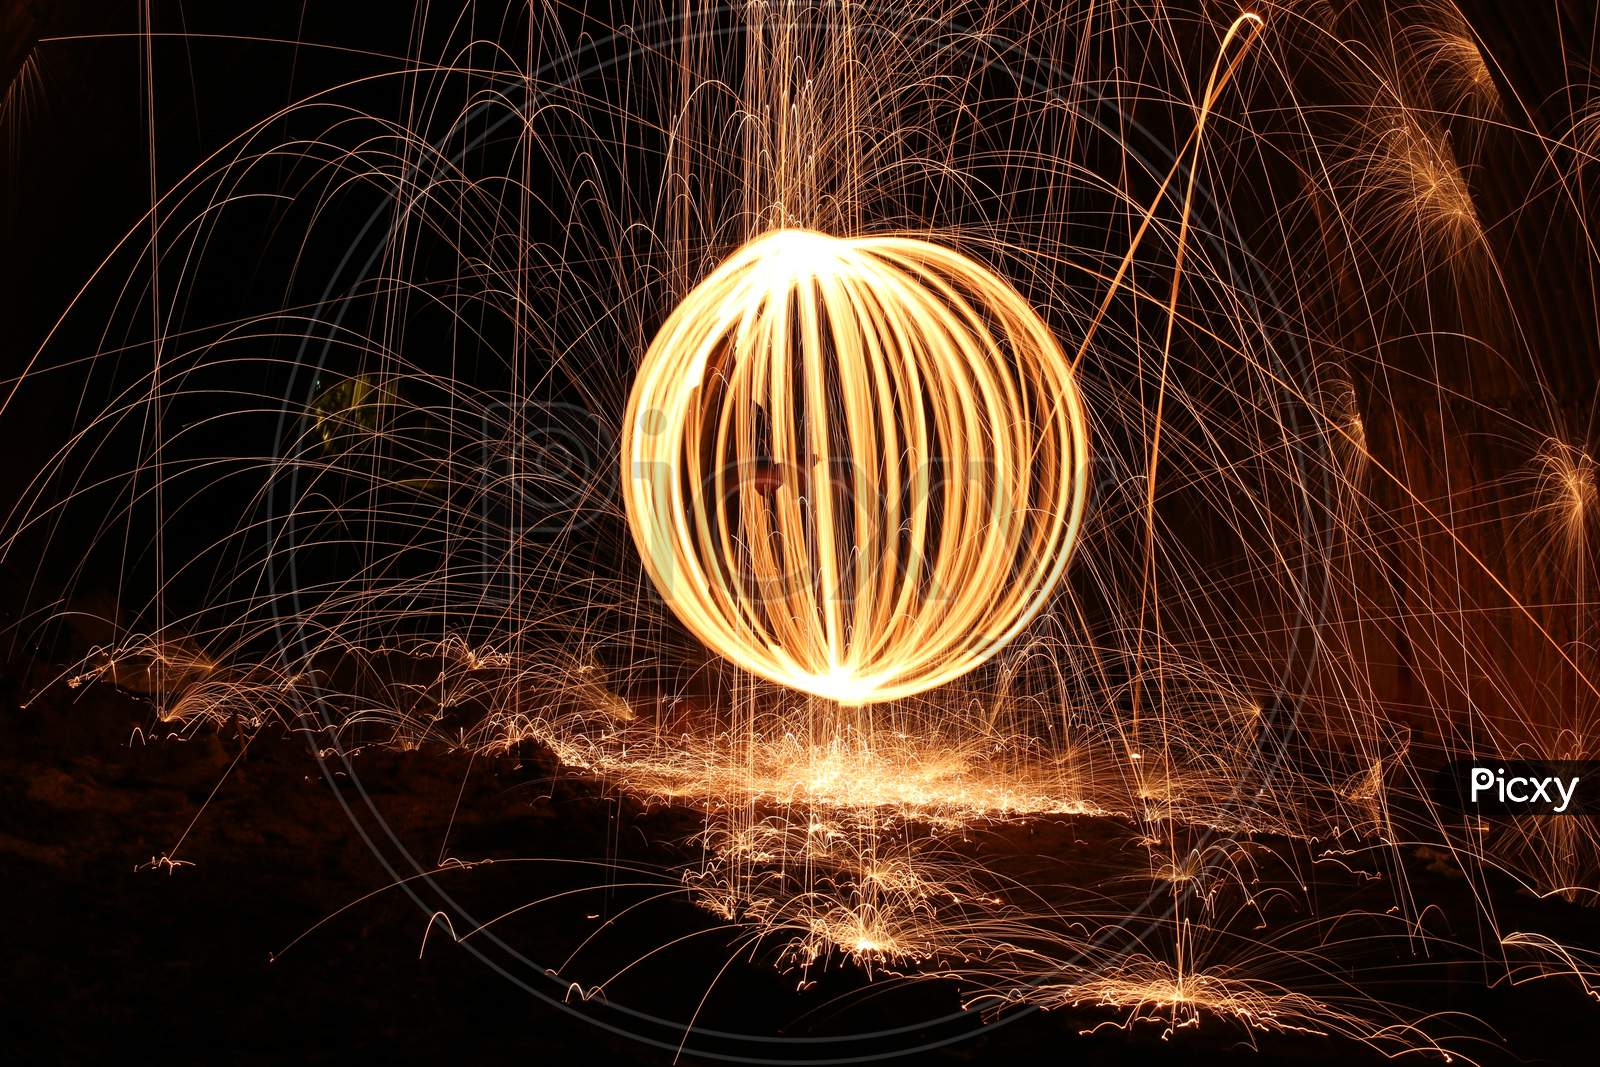 Spinning Fireworks Light Making Attractive Design In The Night